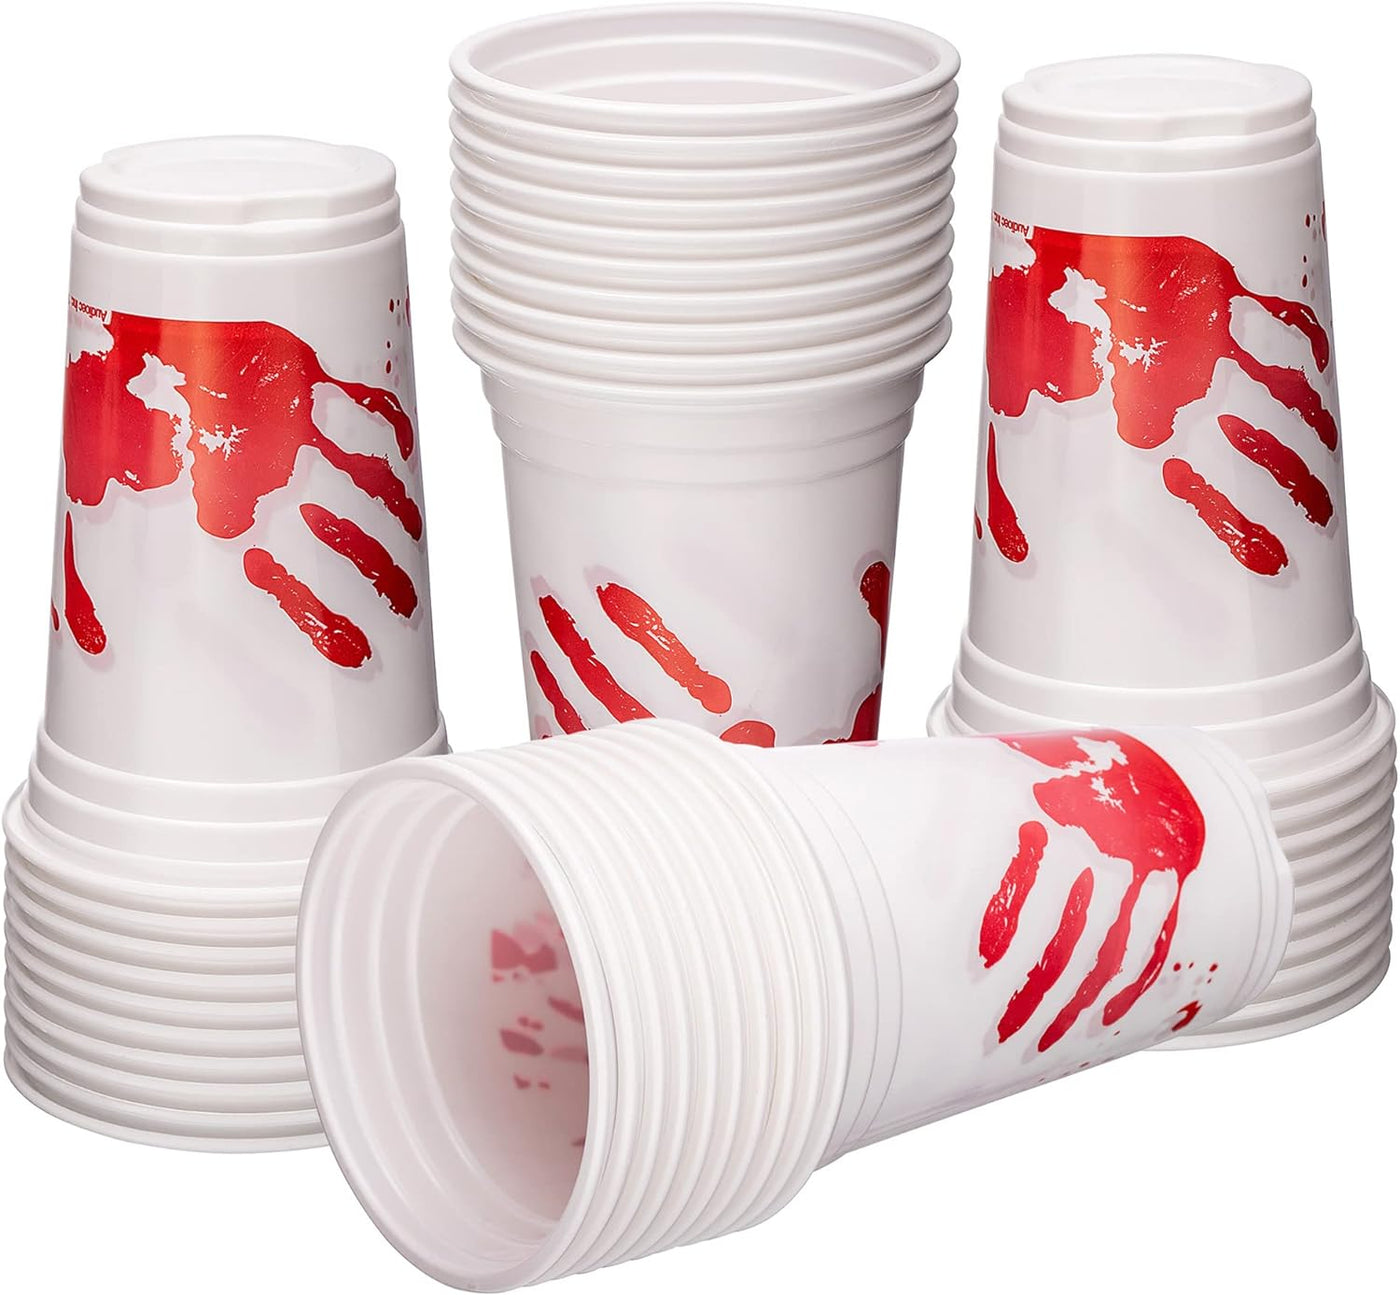 ArtCreativity Blood Print Halloween Party Plastic Cups, Set of 50, 10 oz Halloween Disposable Cups, Halloween Party Supplies and Drinking Decorations, For Juice, Soda, Punch, and More